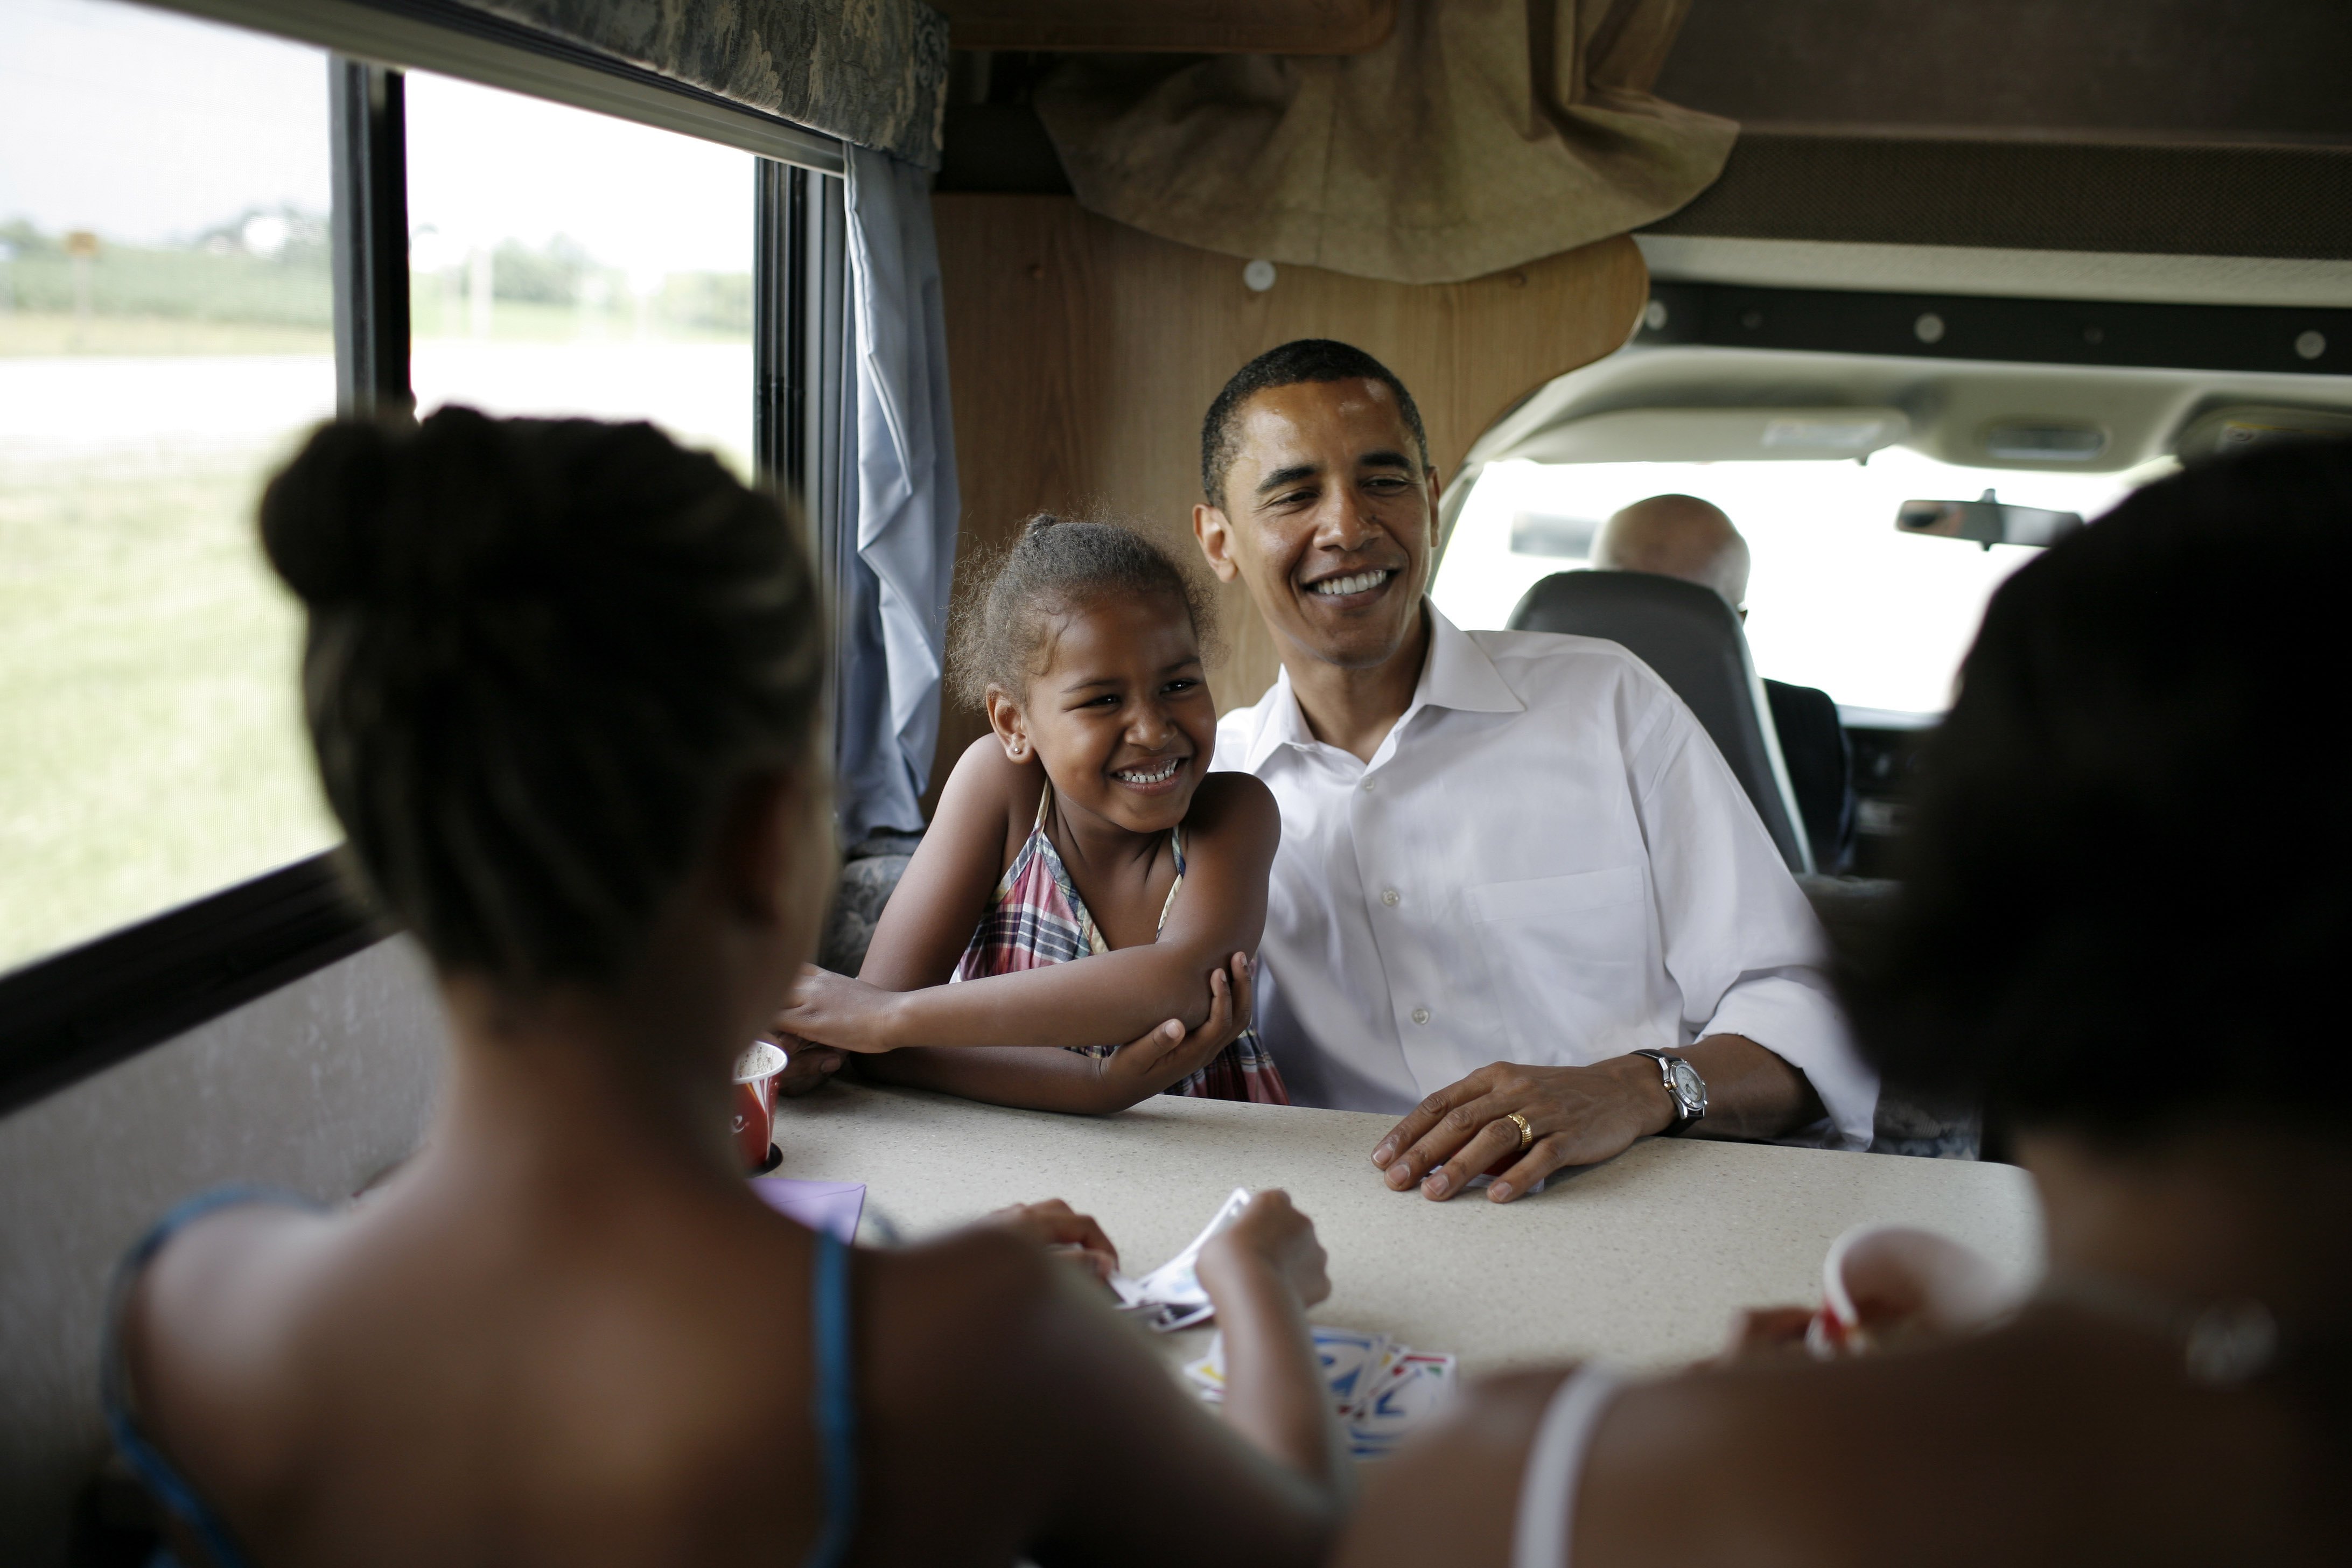 Michelle, Malia, Sasha and Barack Obama playing cards in their RV  while on a campaign swing between Oskaloosa and Pella, Iowa on July 4, 2007. | Source: Getty Images